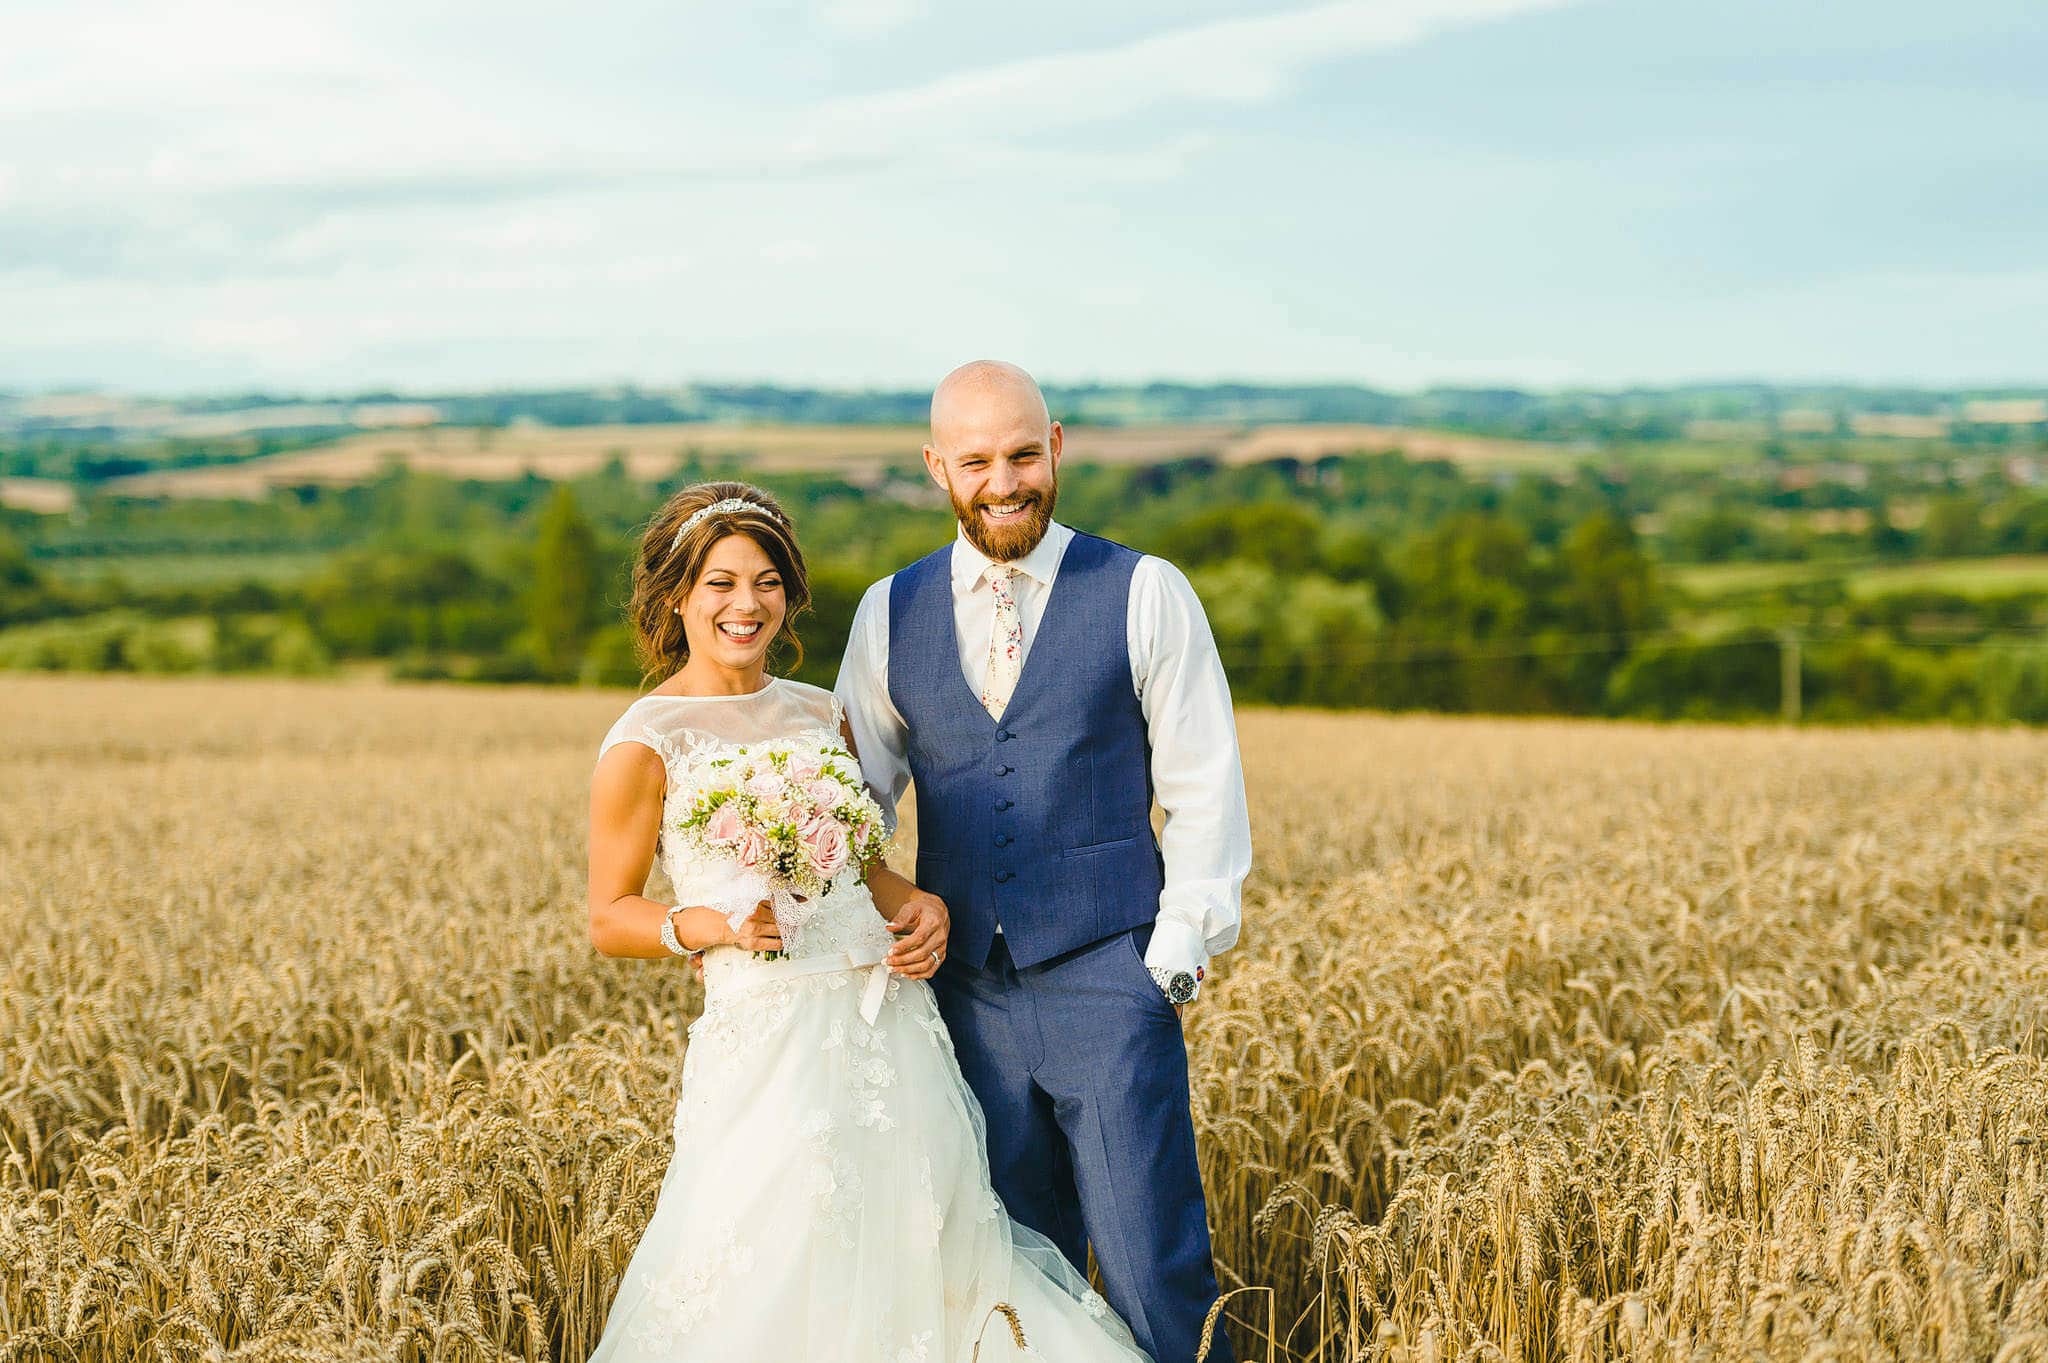 Midlands wedding photography - 2015 Review 30